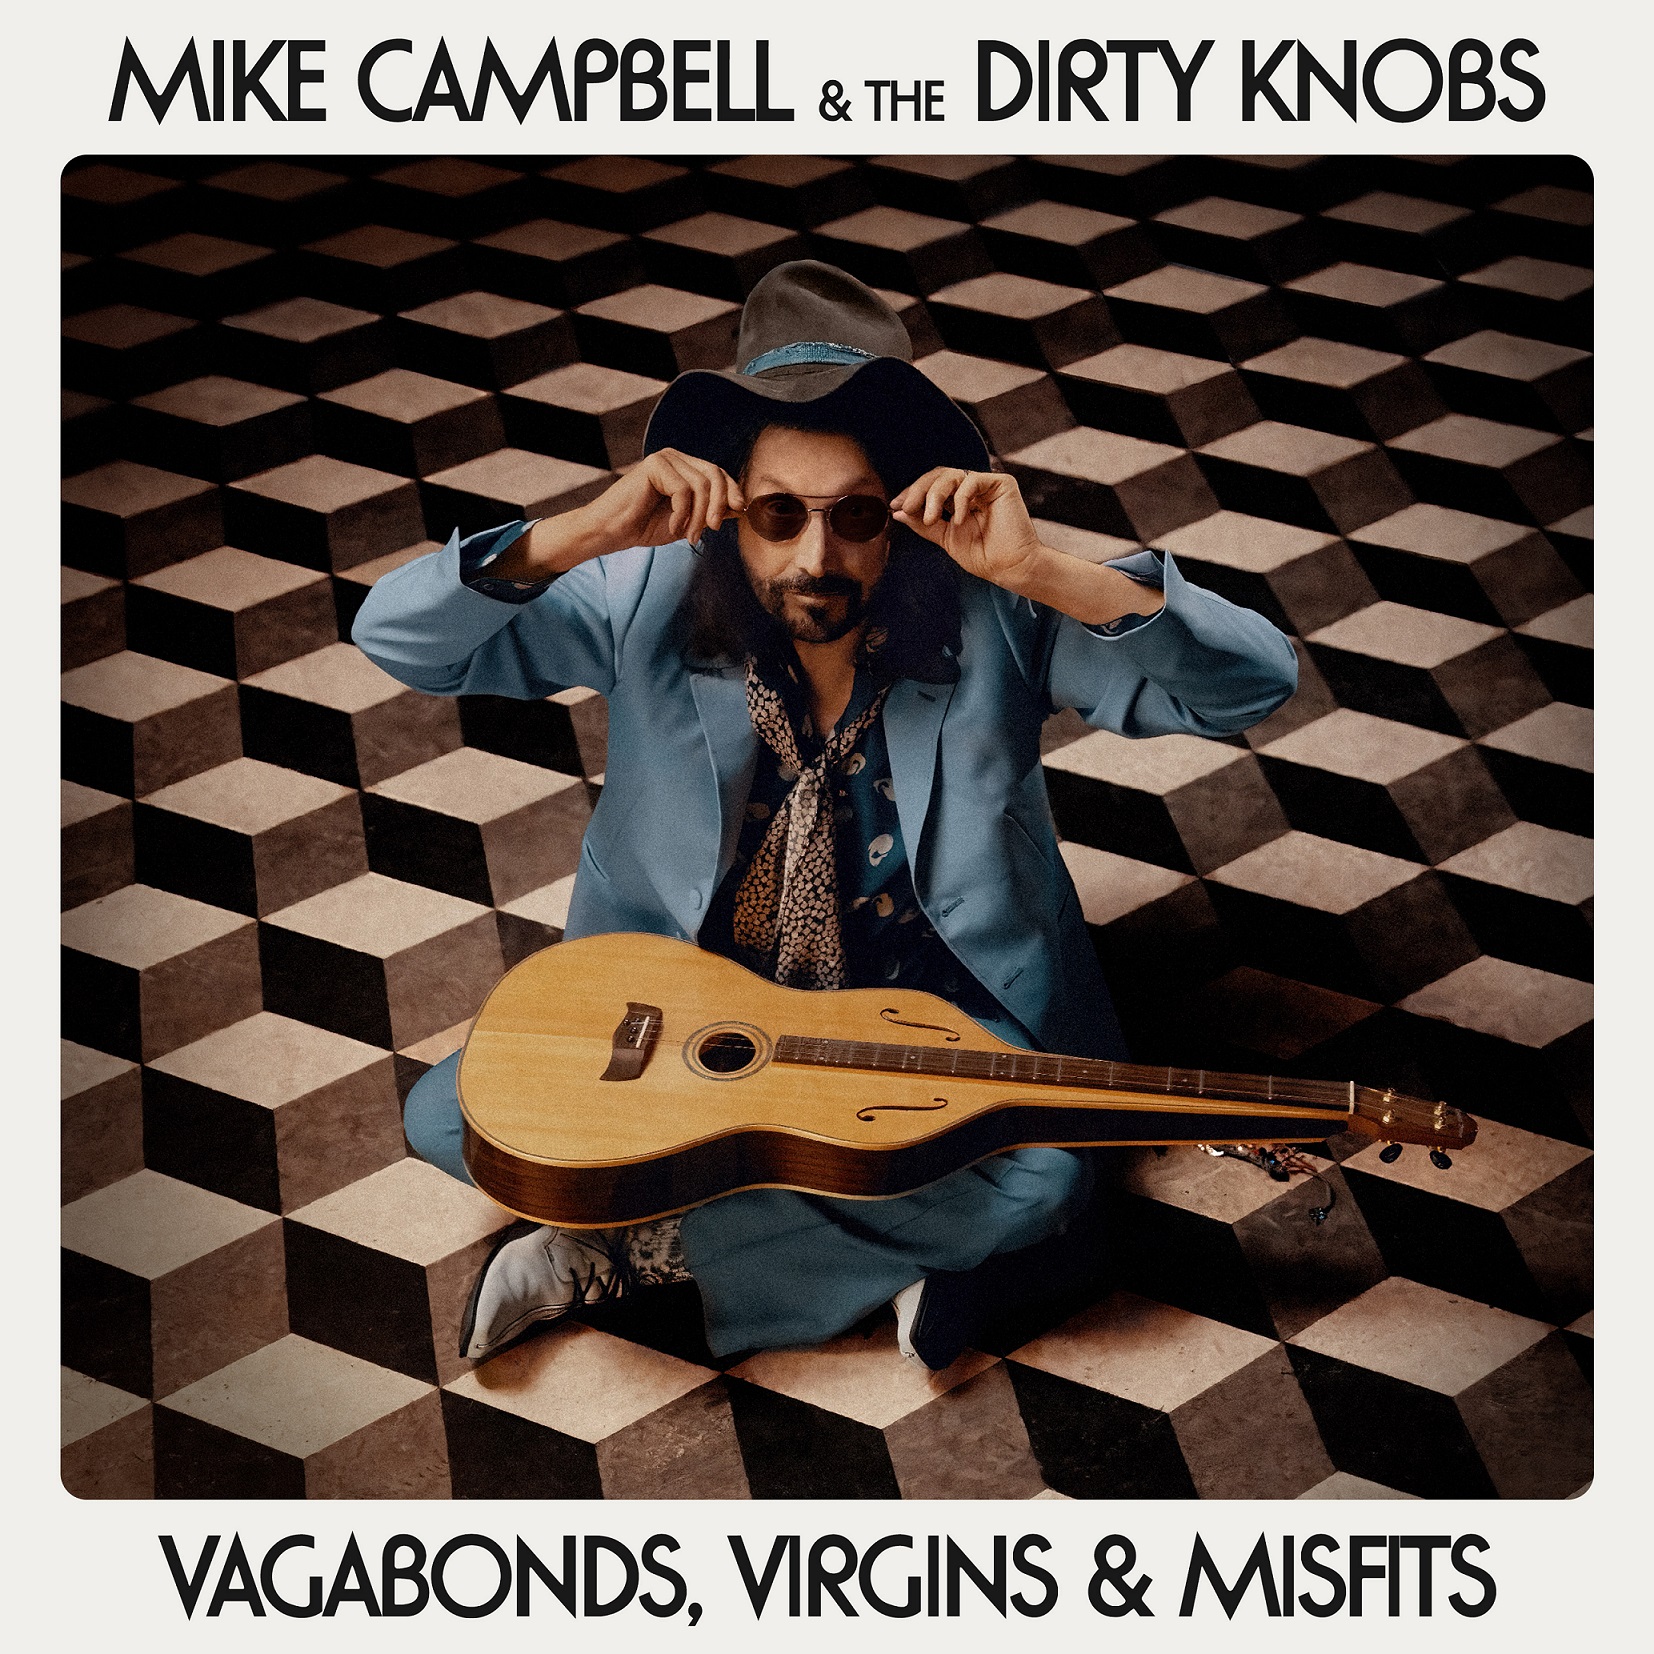 Mike Campbell (Tom Petty & the Heartbreakers) & the Dirty Knobs' "Vagabonds, Virgins & Misfits" out 6/14